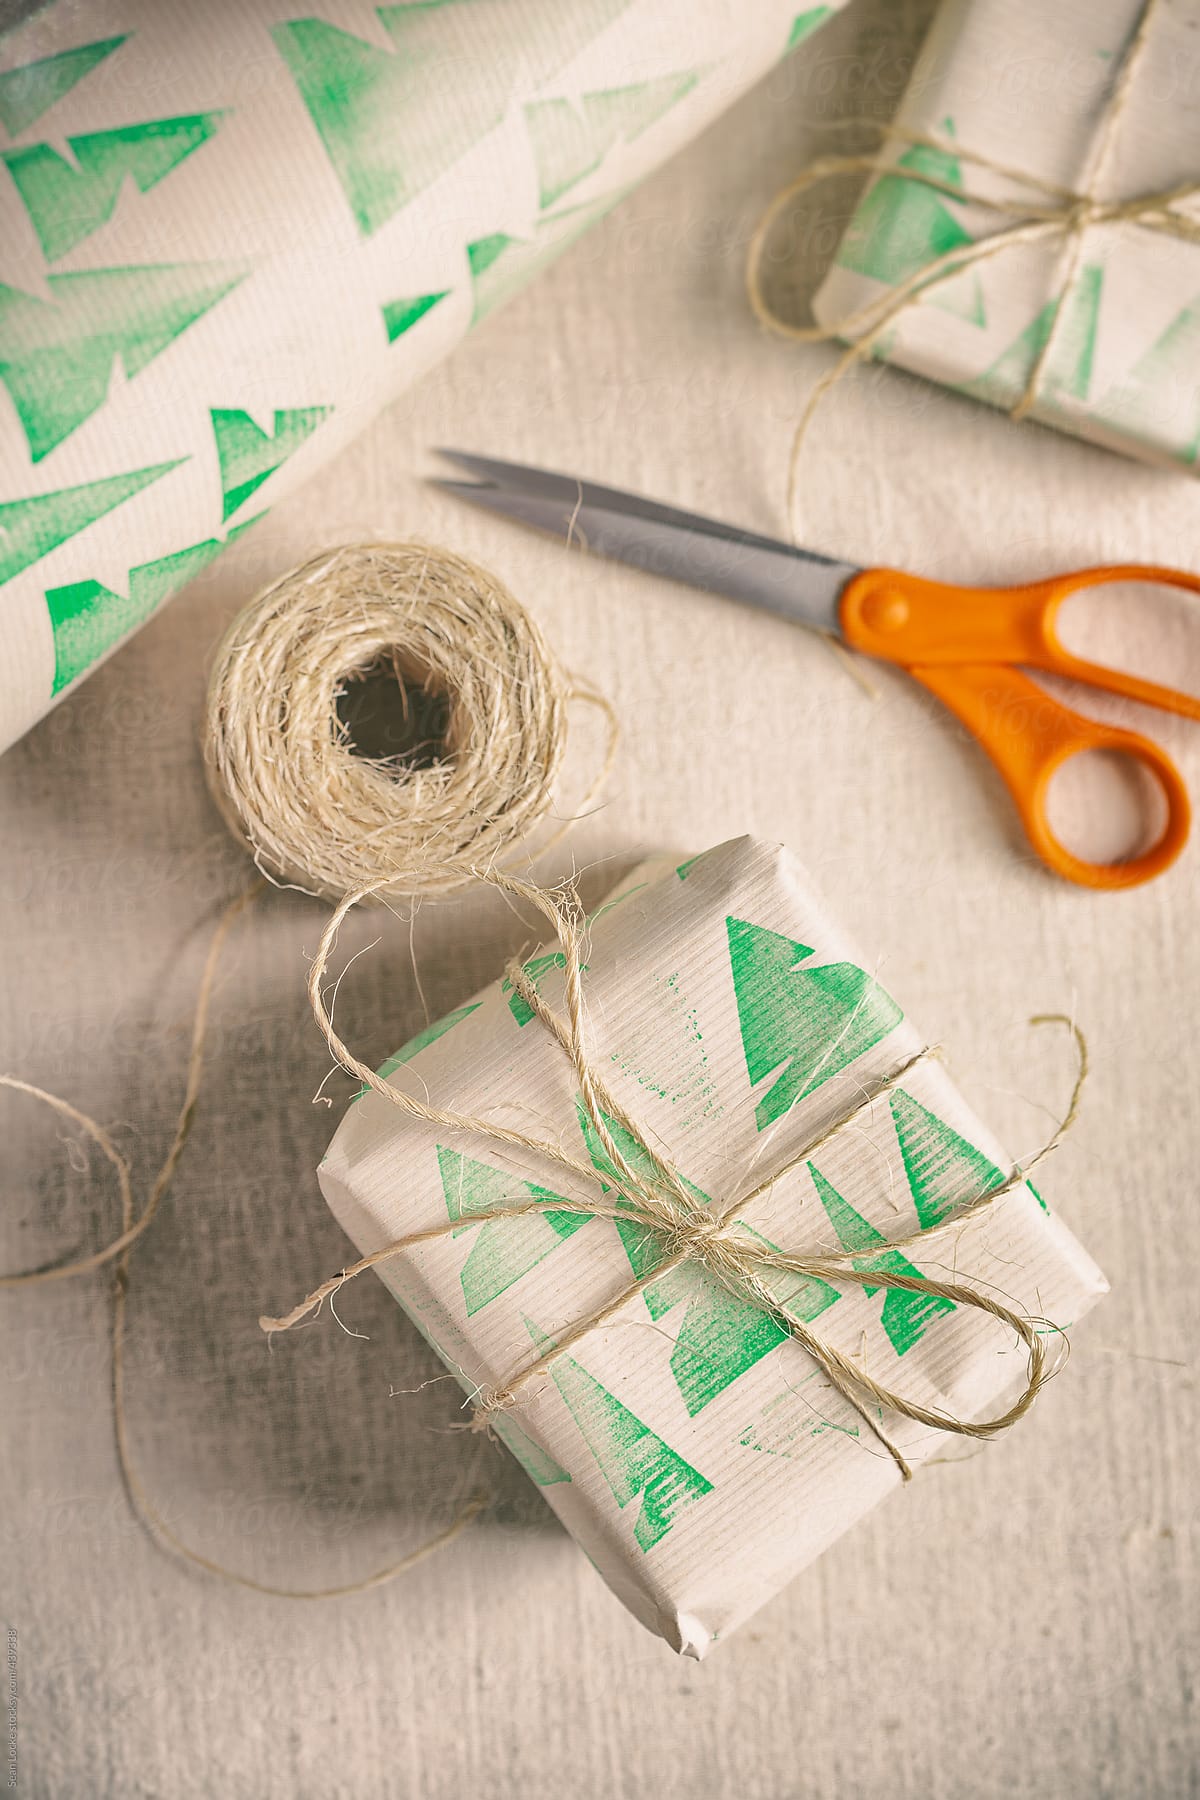 Wrapping: Results Of Decorating Your Own Christmas Wrapping Paper